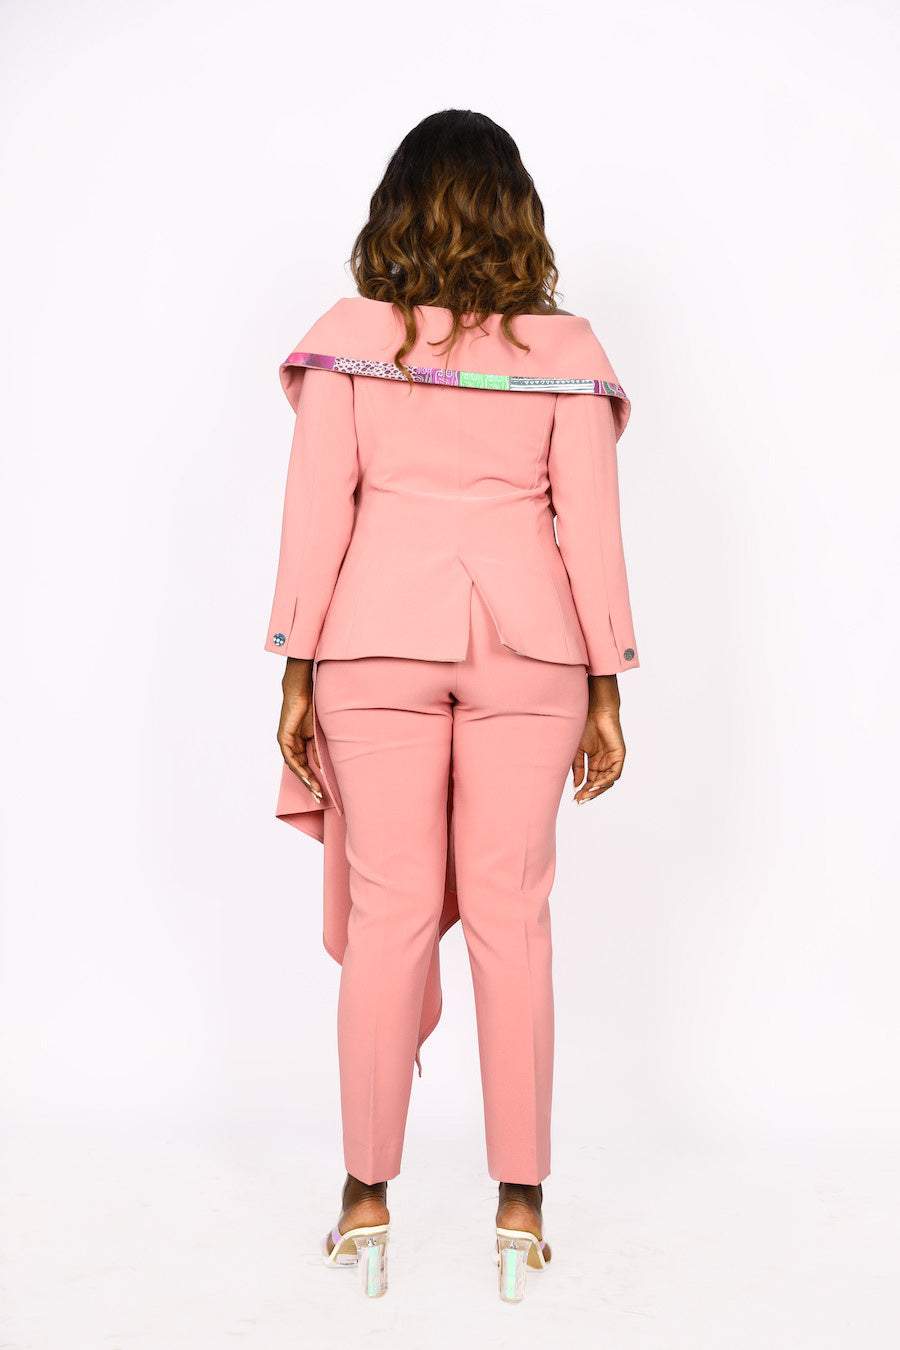 African Patched Stylish Pink Suit-danddclothing-AFRICAN WEAR FOR WOMEN,Ladies Suits,Pink